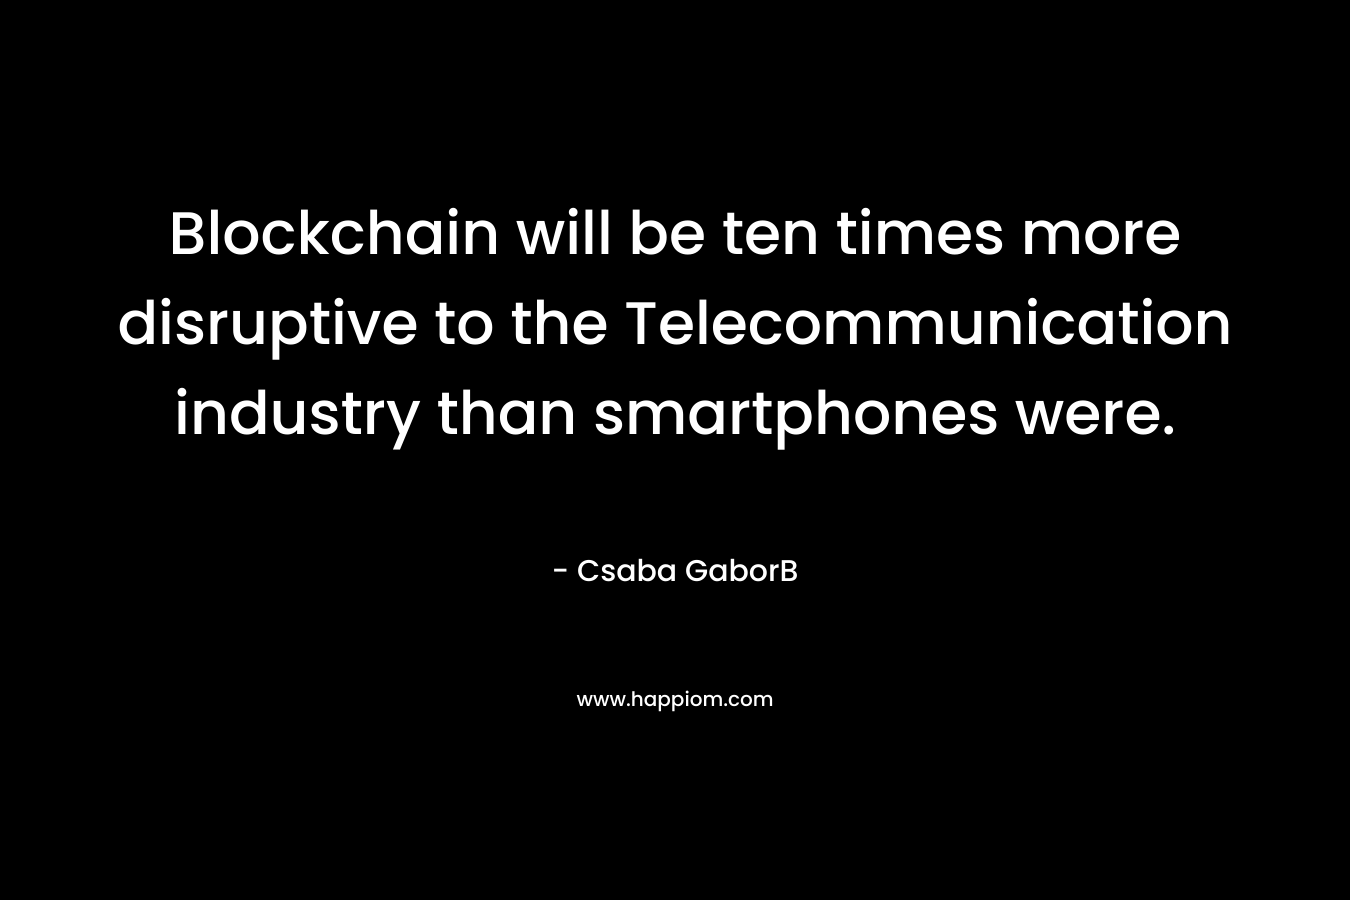 Blockchain will be ten times more disruptive to the Telecommunication industry than smartphones were. – Csaba GaborB